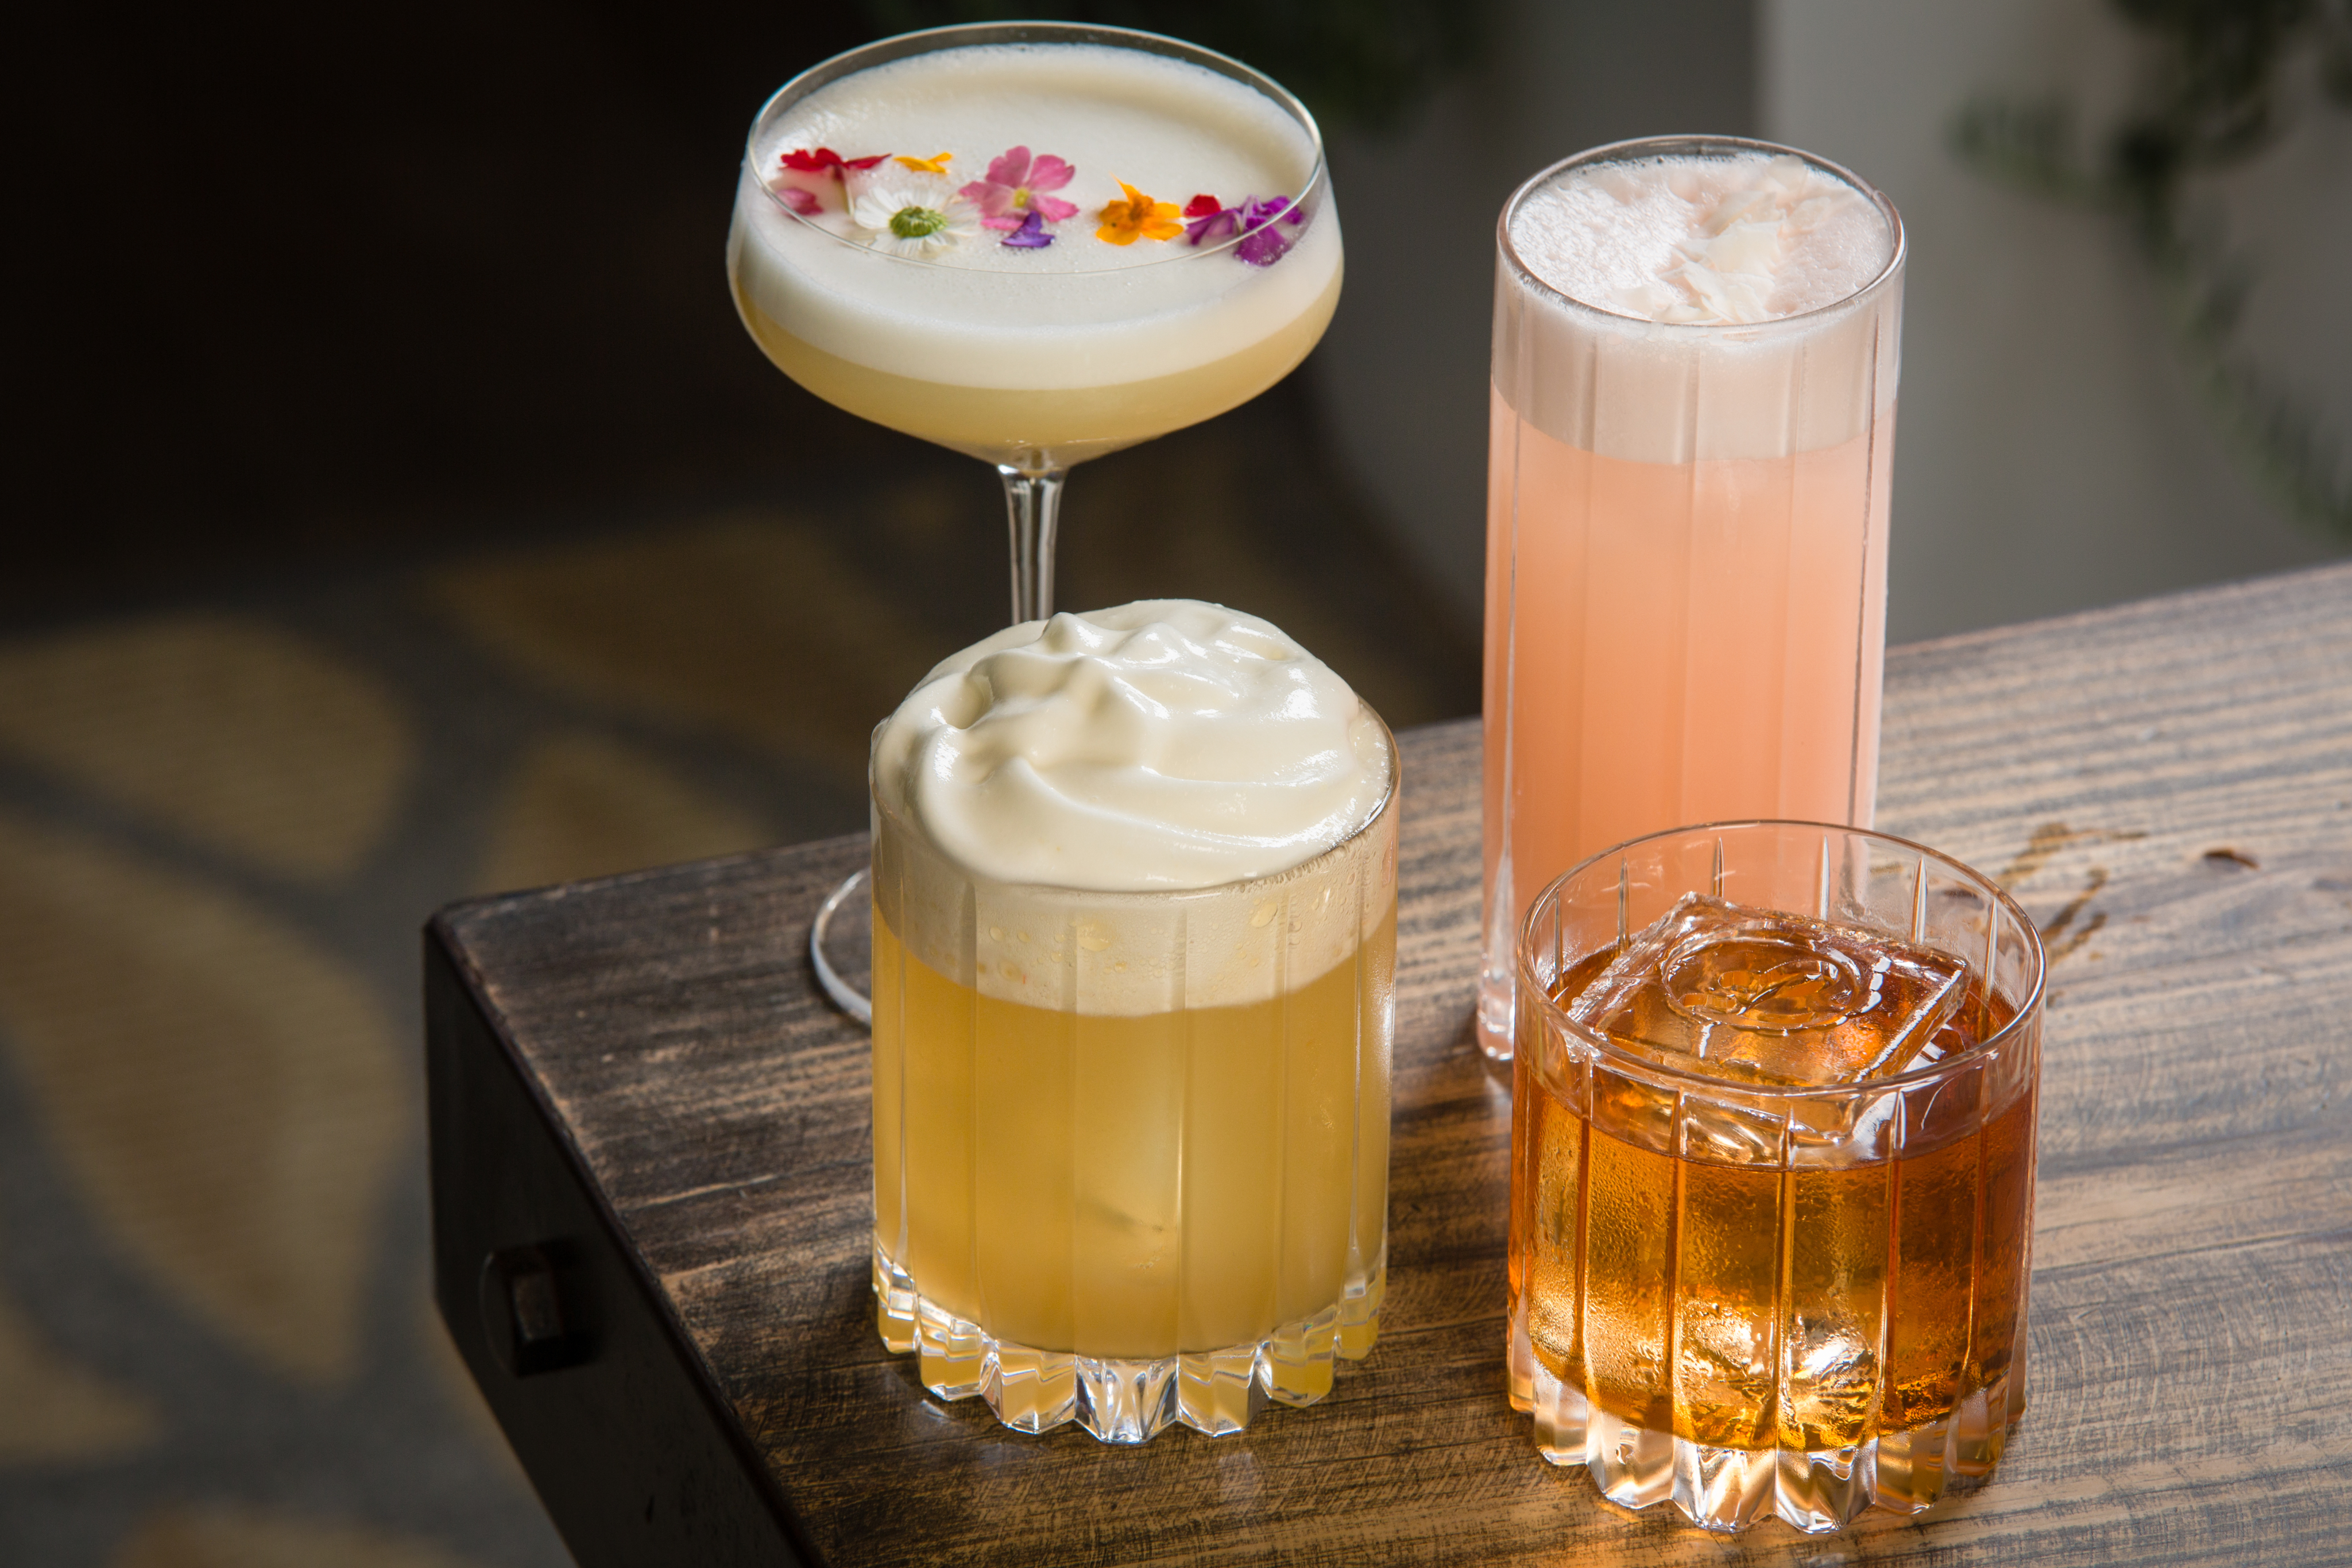 Four different cocktails on a wooden table at an open-air patio, each with distinct presentations ranging from floral garnishes to frothy toppings.